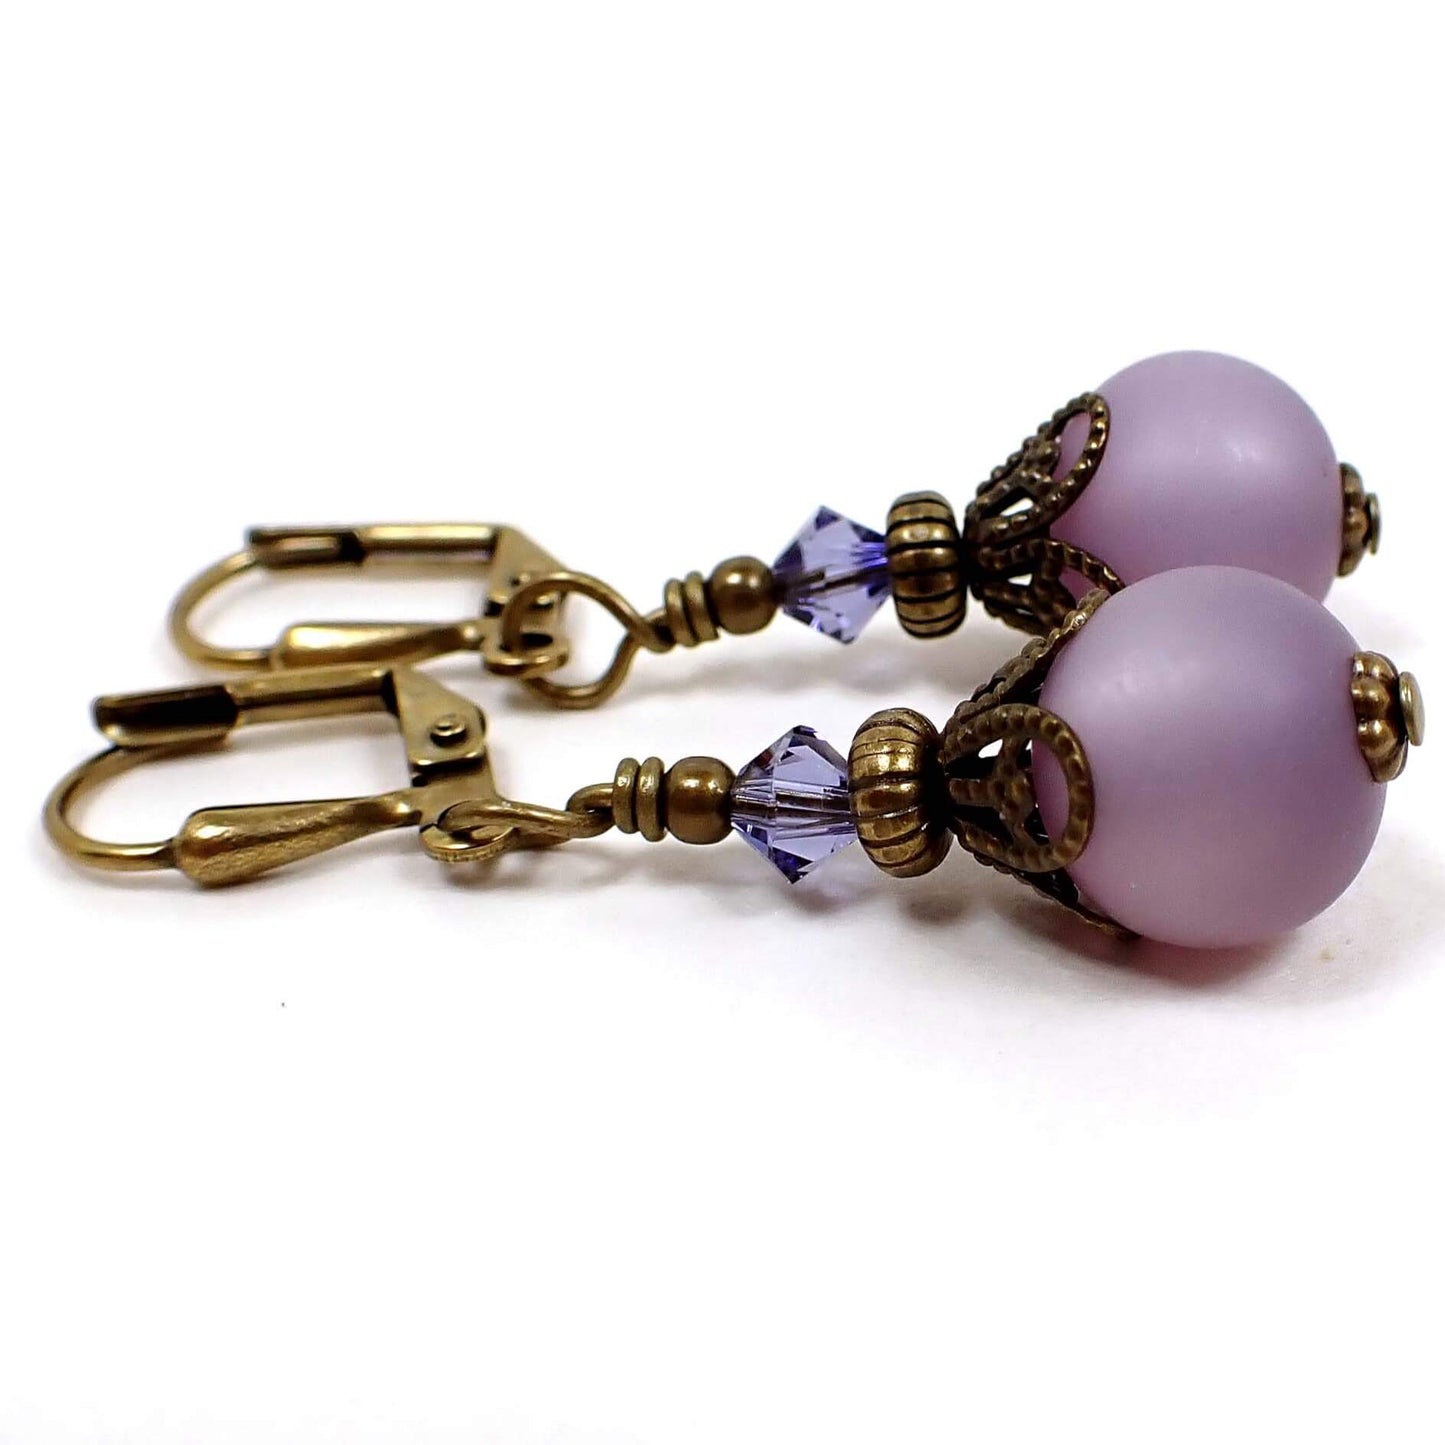 Side view of the small handmade frosted purple lucite drop earrings. The metal in antiqued brass in color. There is a purple glass faceted bead at the top and a round frosted matte purple lucite bead at the bottom.